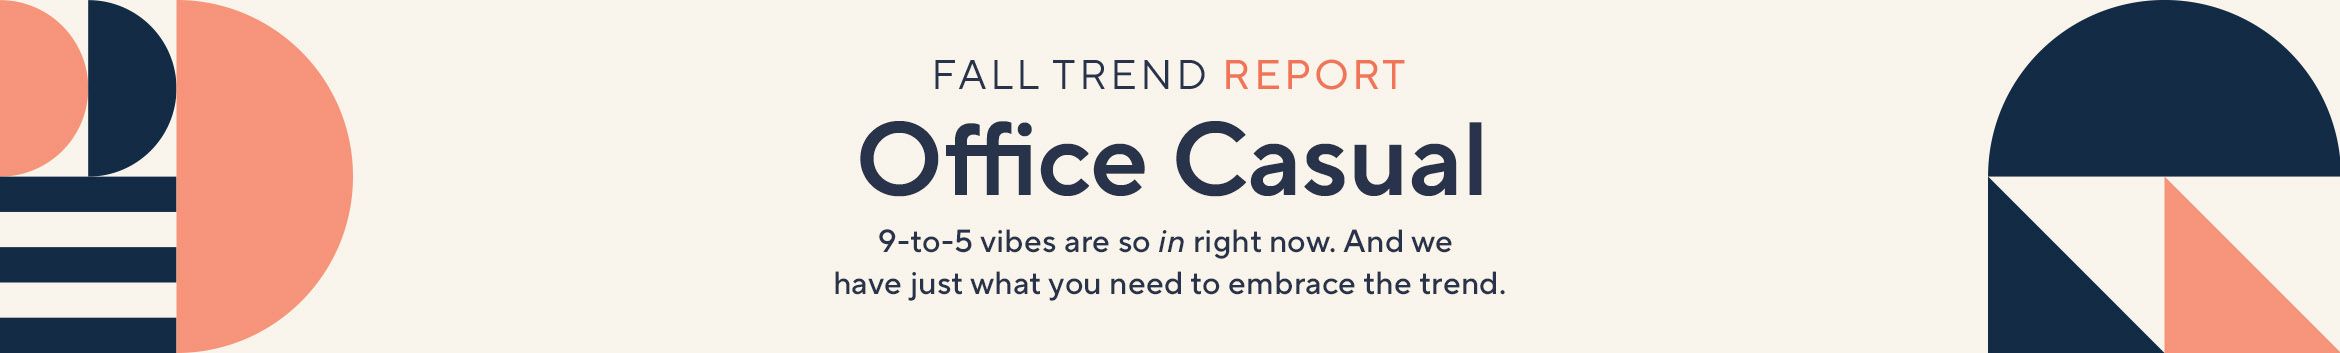 Fall Trend Report. Office Casual. 9-to-5 vibes are so in right now. And we have just what you need to embrace the trend.